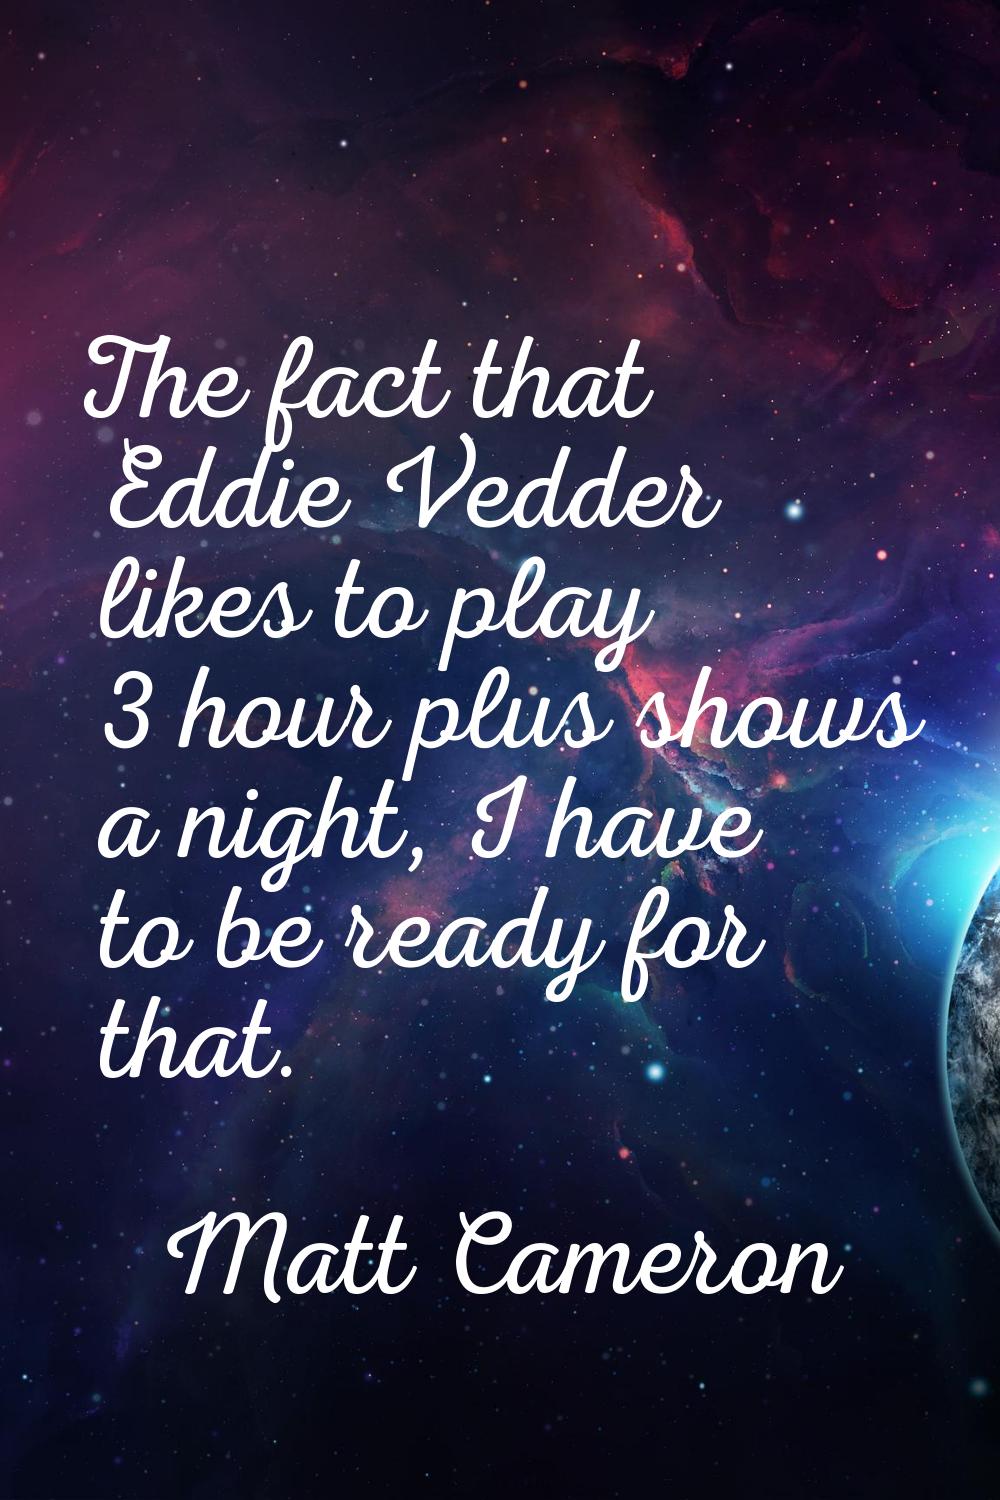 The fact that Eddie Vedder likes to play 3 hour plus shows a night, I have to be ready for that.